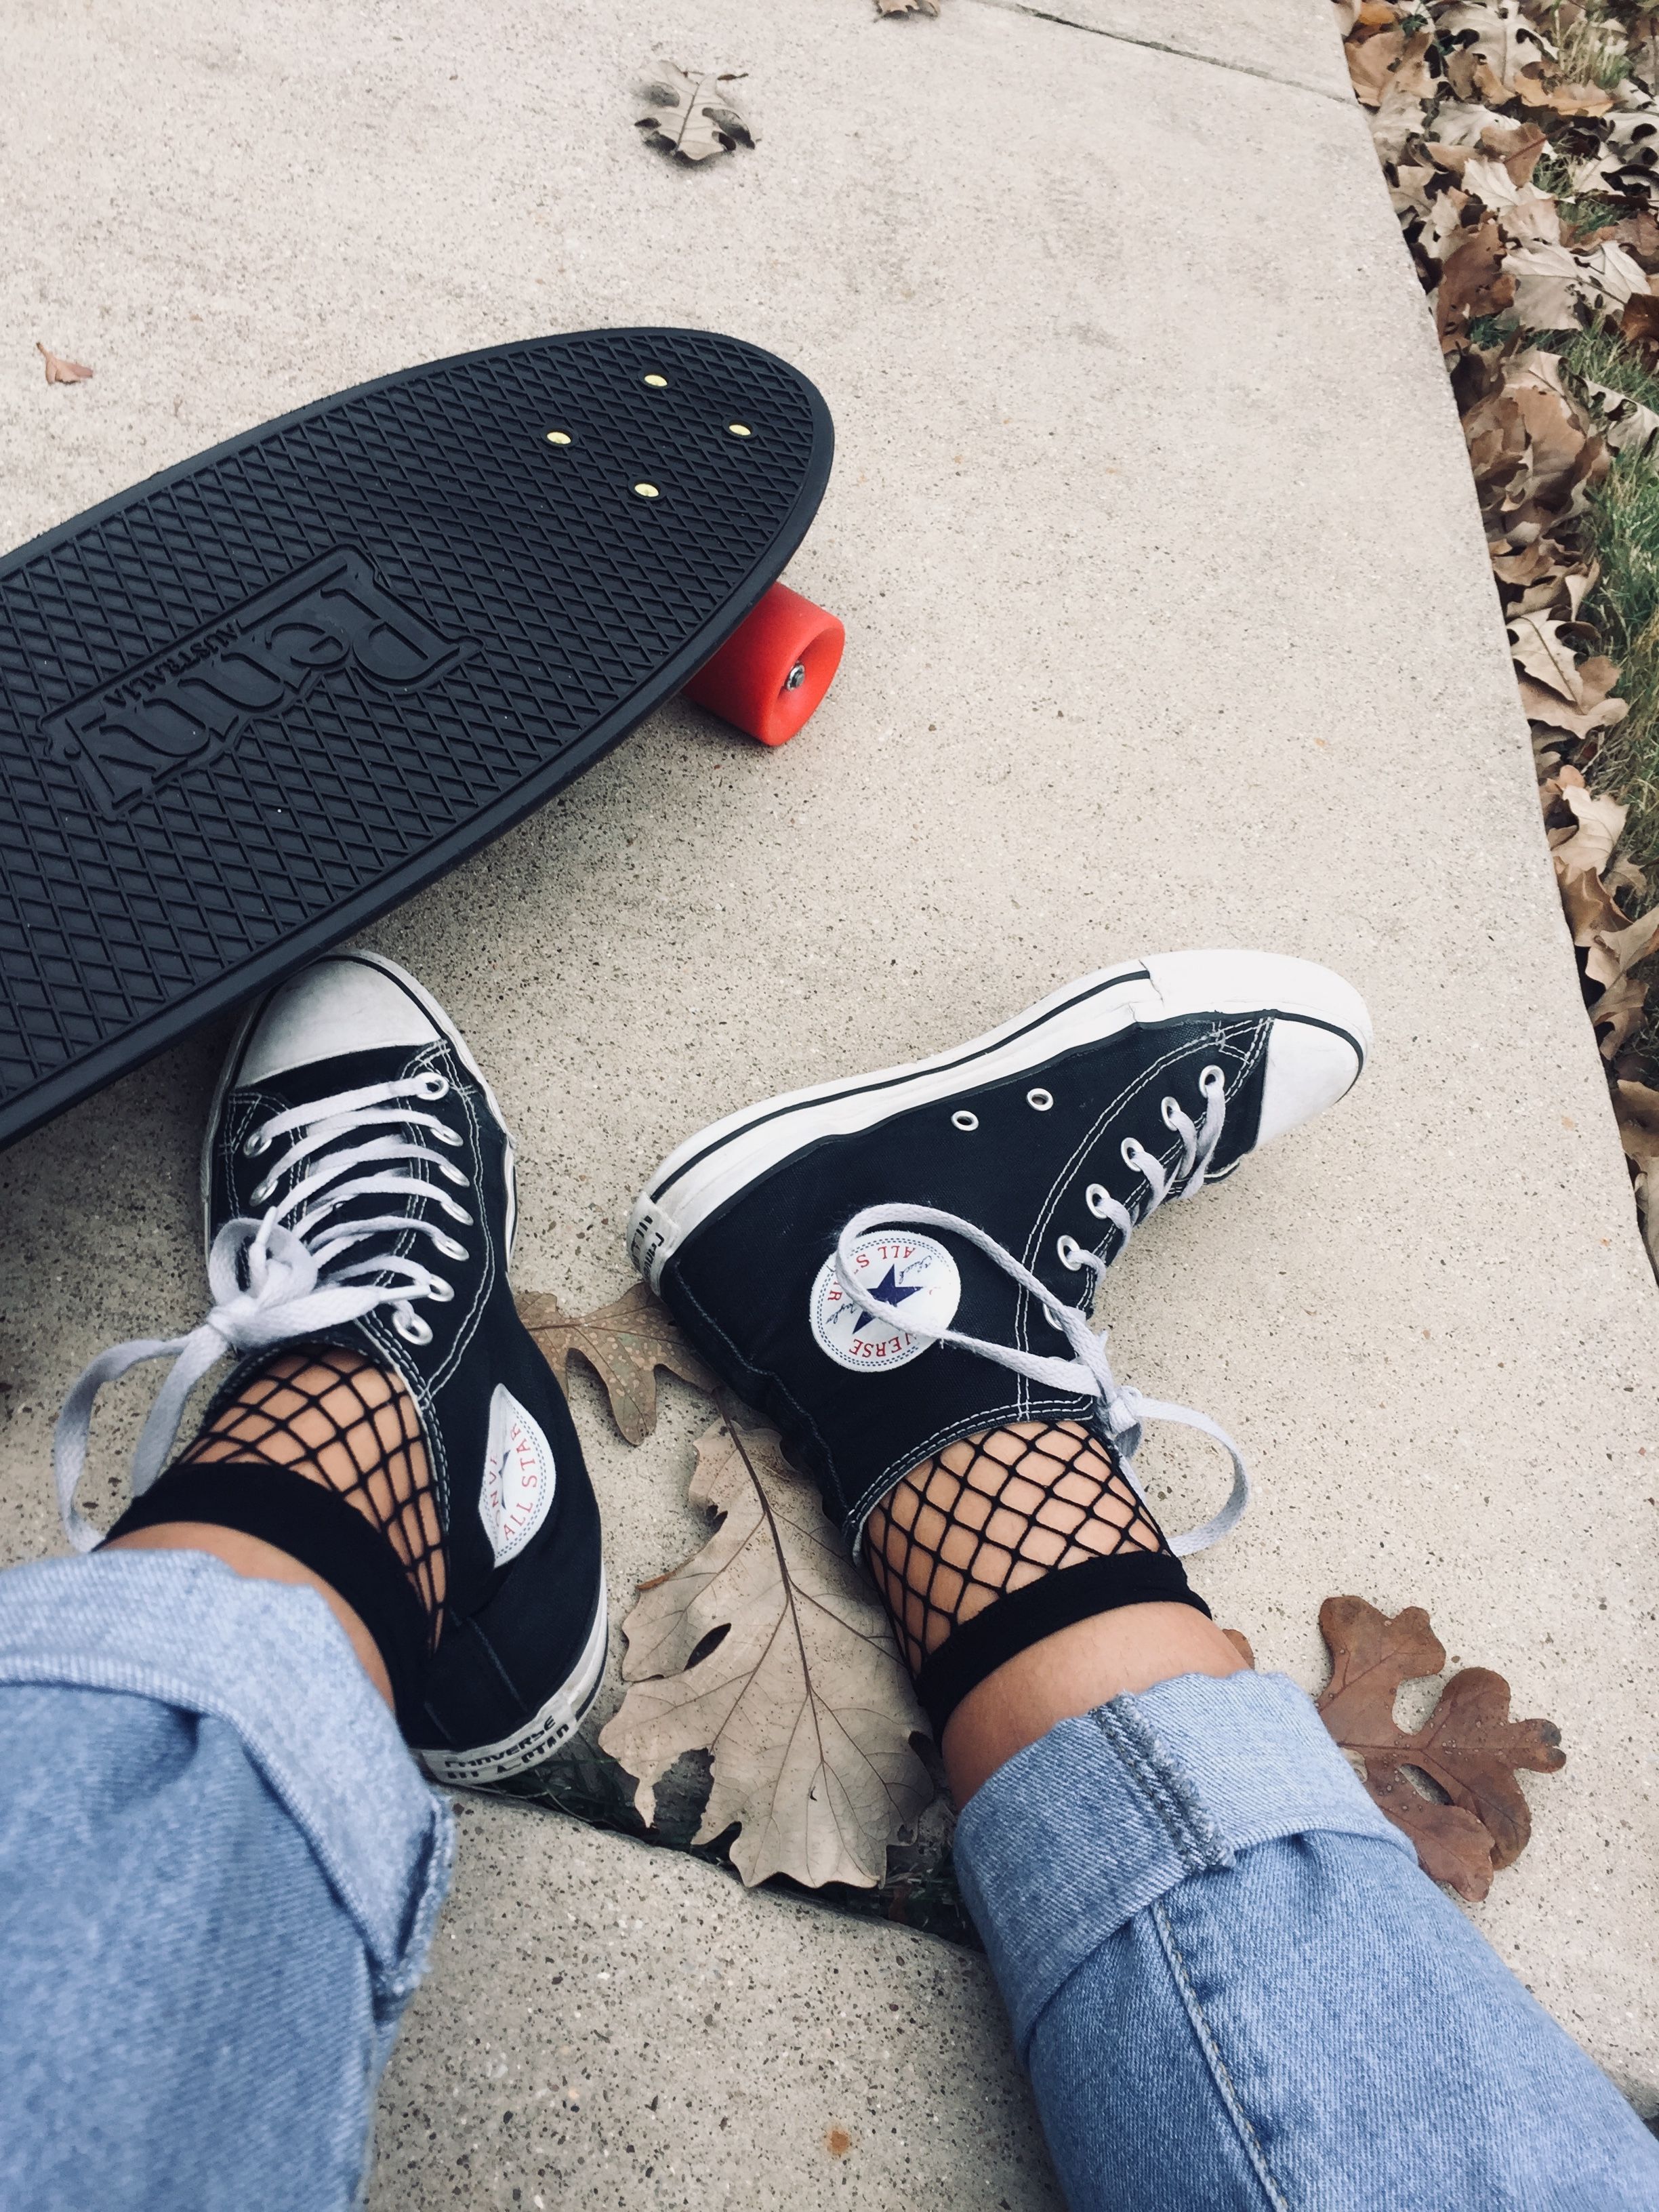 Didn't think I could be aesthetic but I guess I can. Shoes. Skate